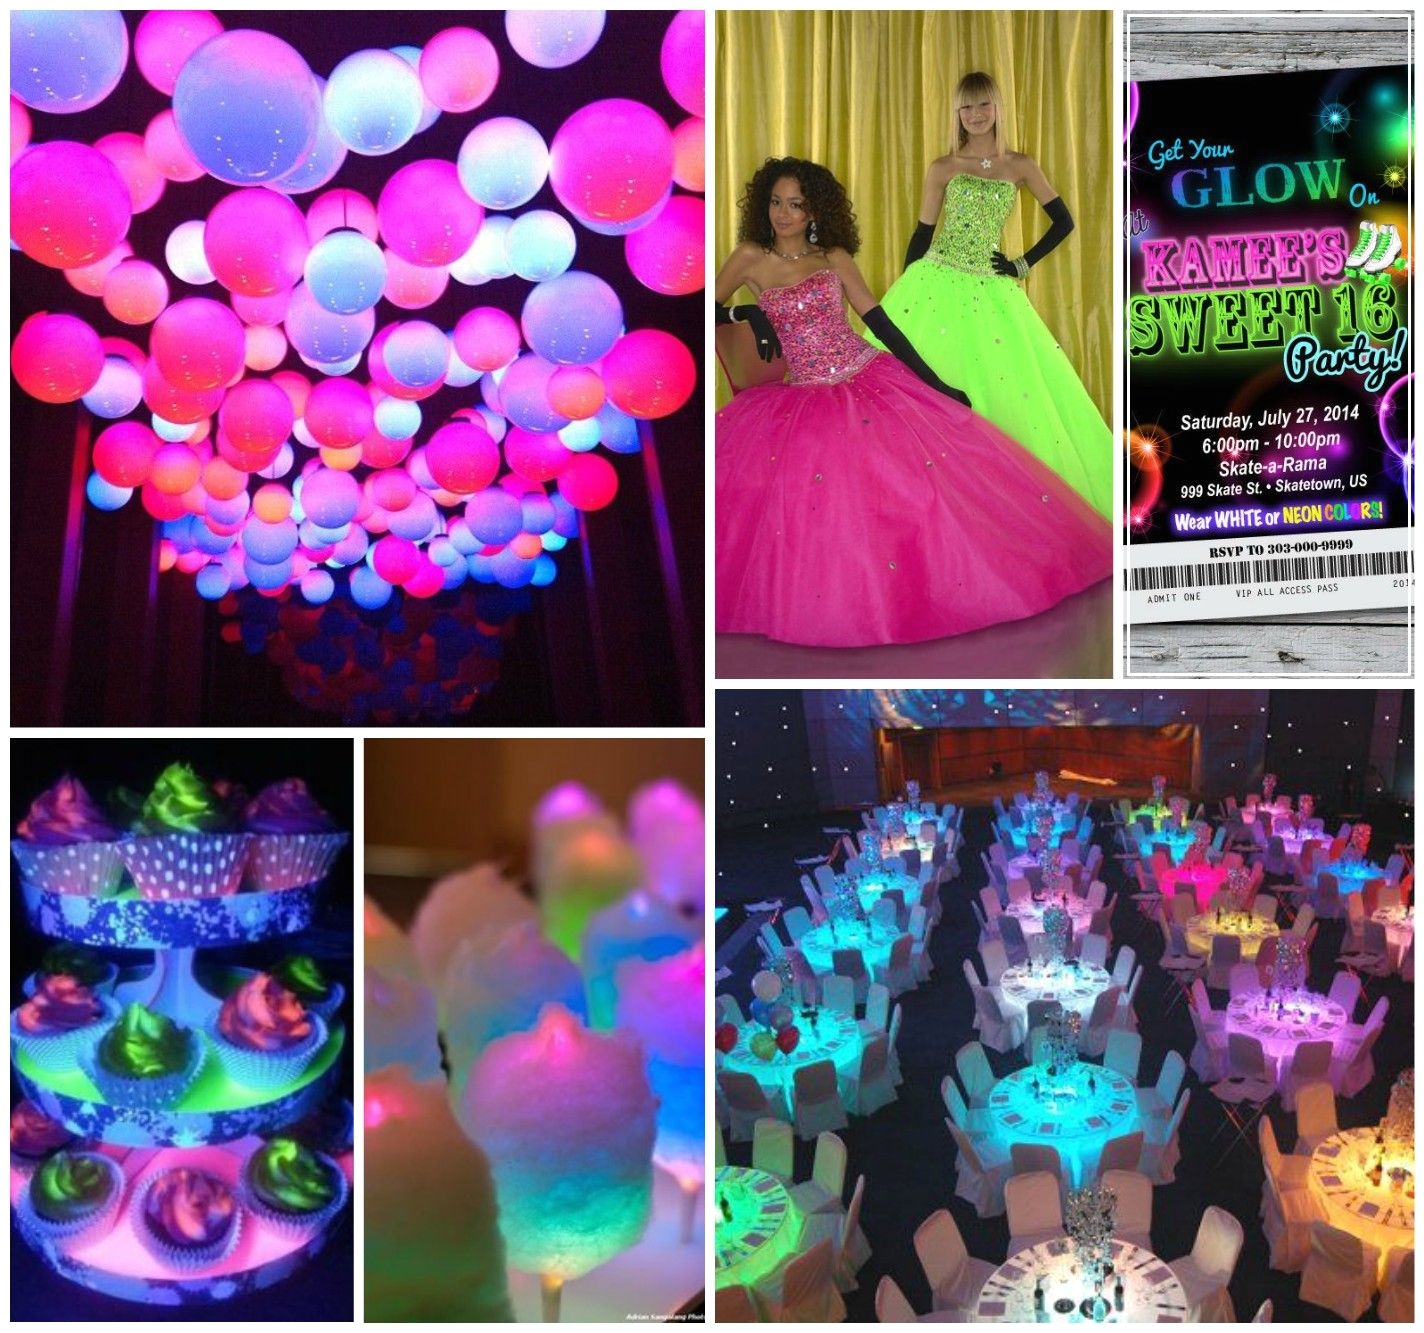 turn off the lights and discover the beauty of glow in the dark your dance floor centerpieces balloons and even your cake can glow in the dark